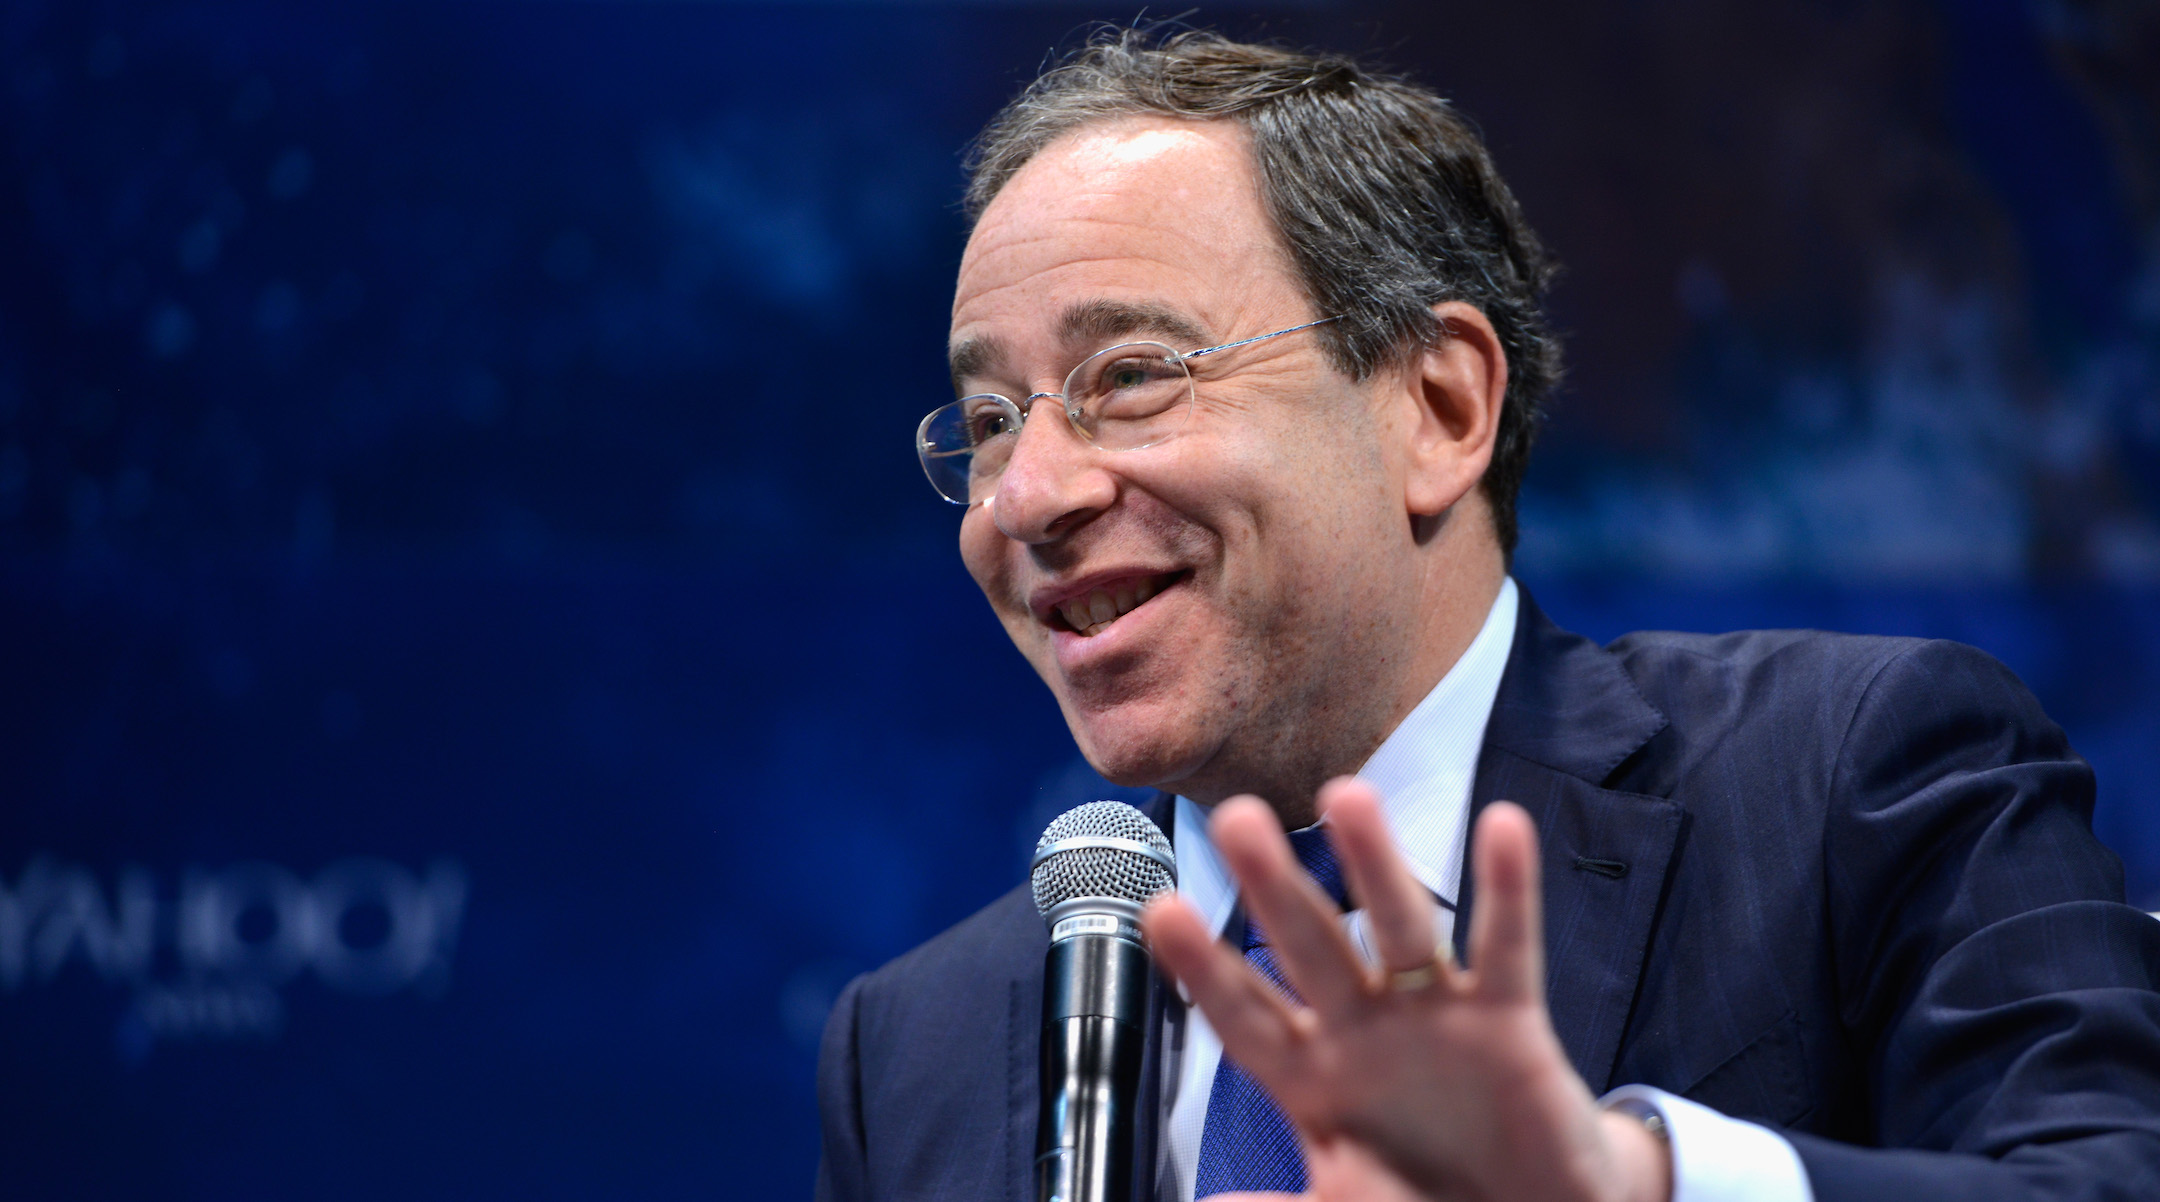 Tom Nides speaks at the Concordia Summit in New York City, Oct. 2, 2015. (Getty Images)